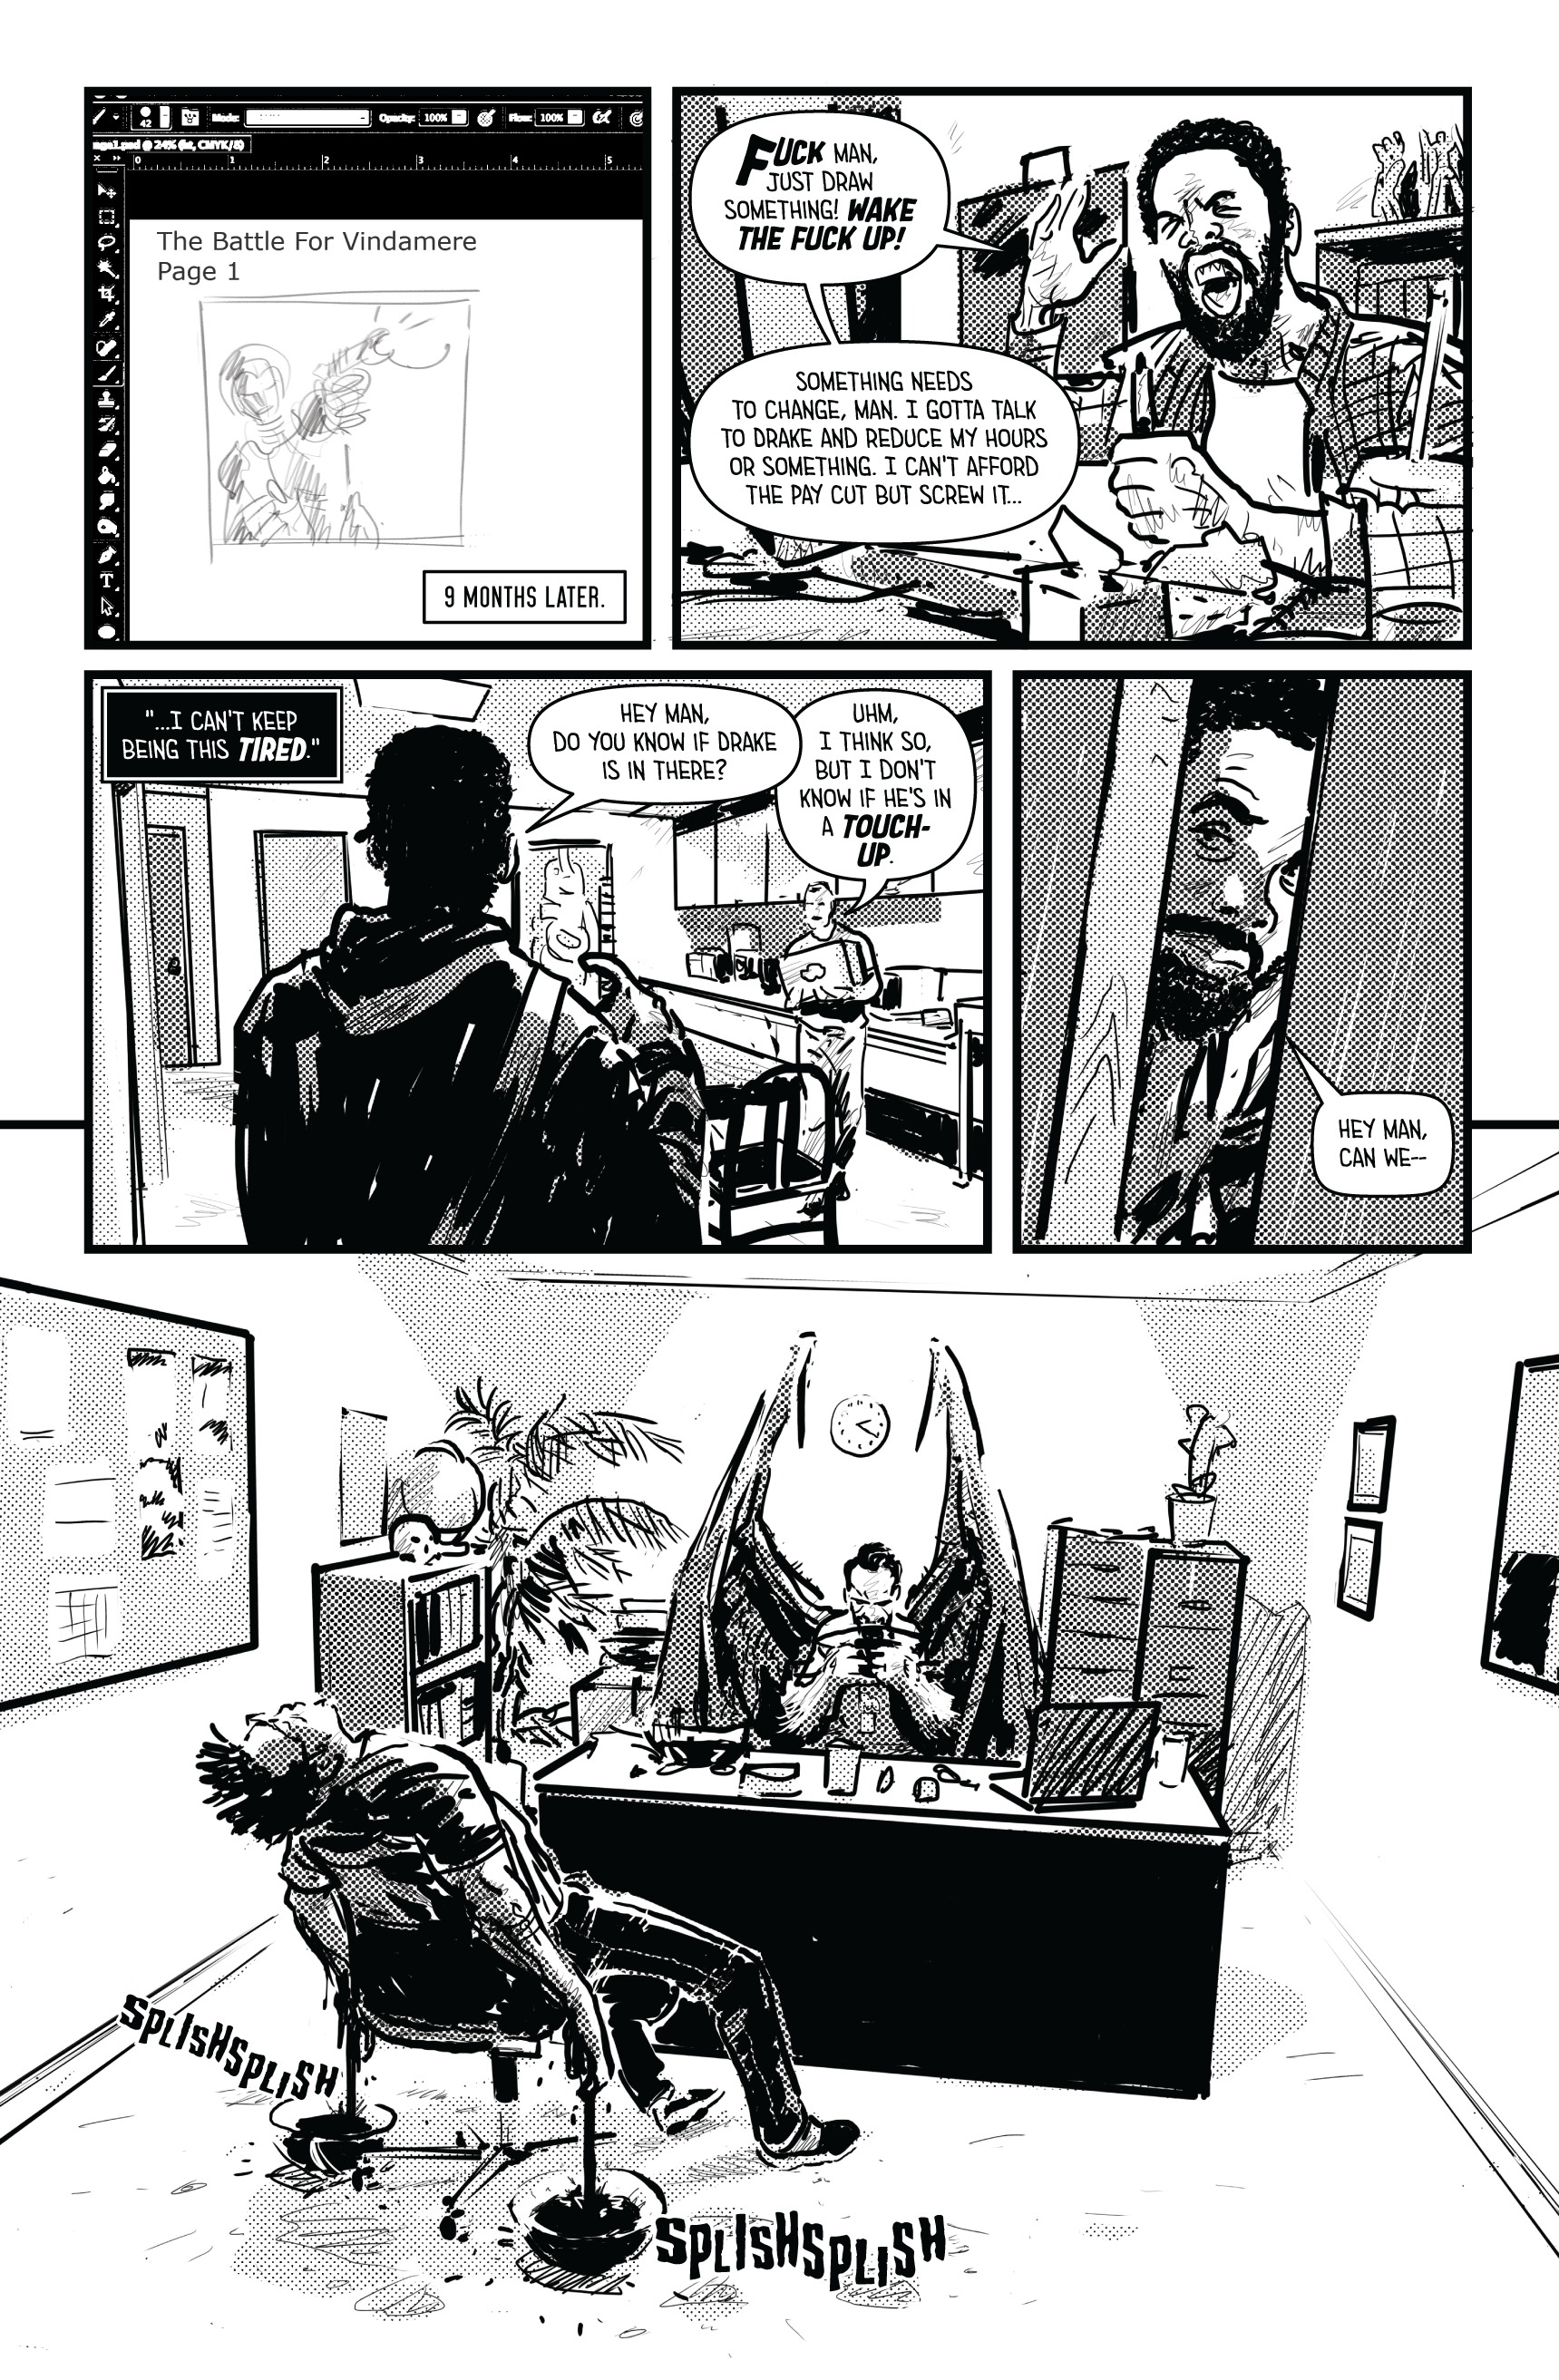 Monocul issue 04 story 01 pg 04-01.png